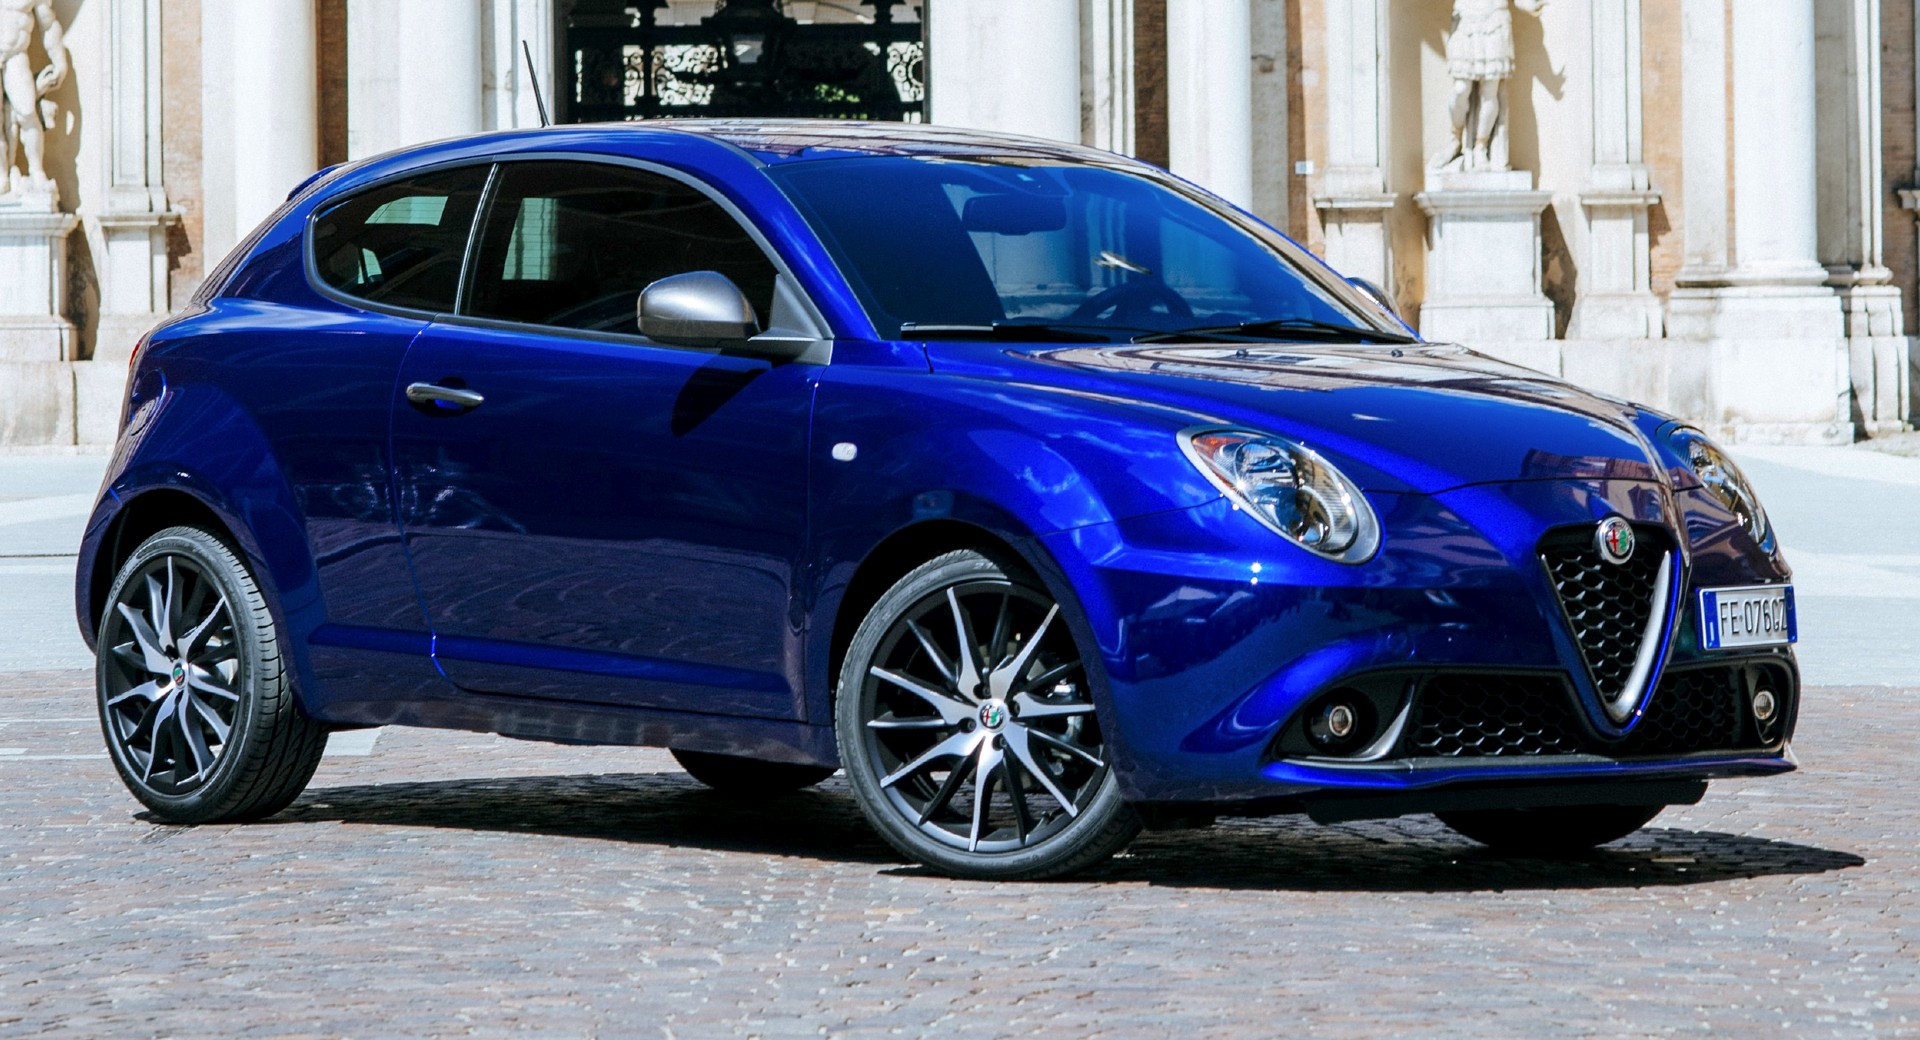 Cool Car For Young Drivers? The 170PS Alfa Romeo MiTO QV Review